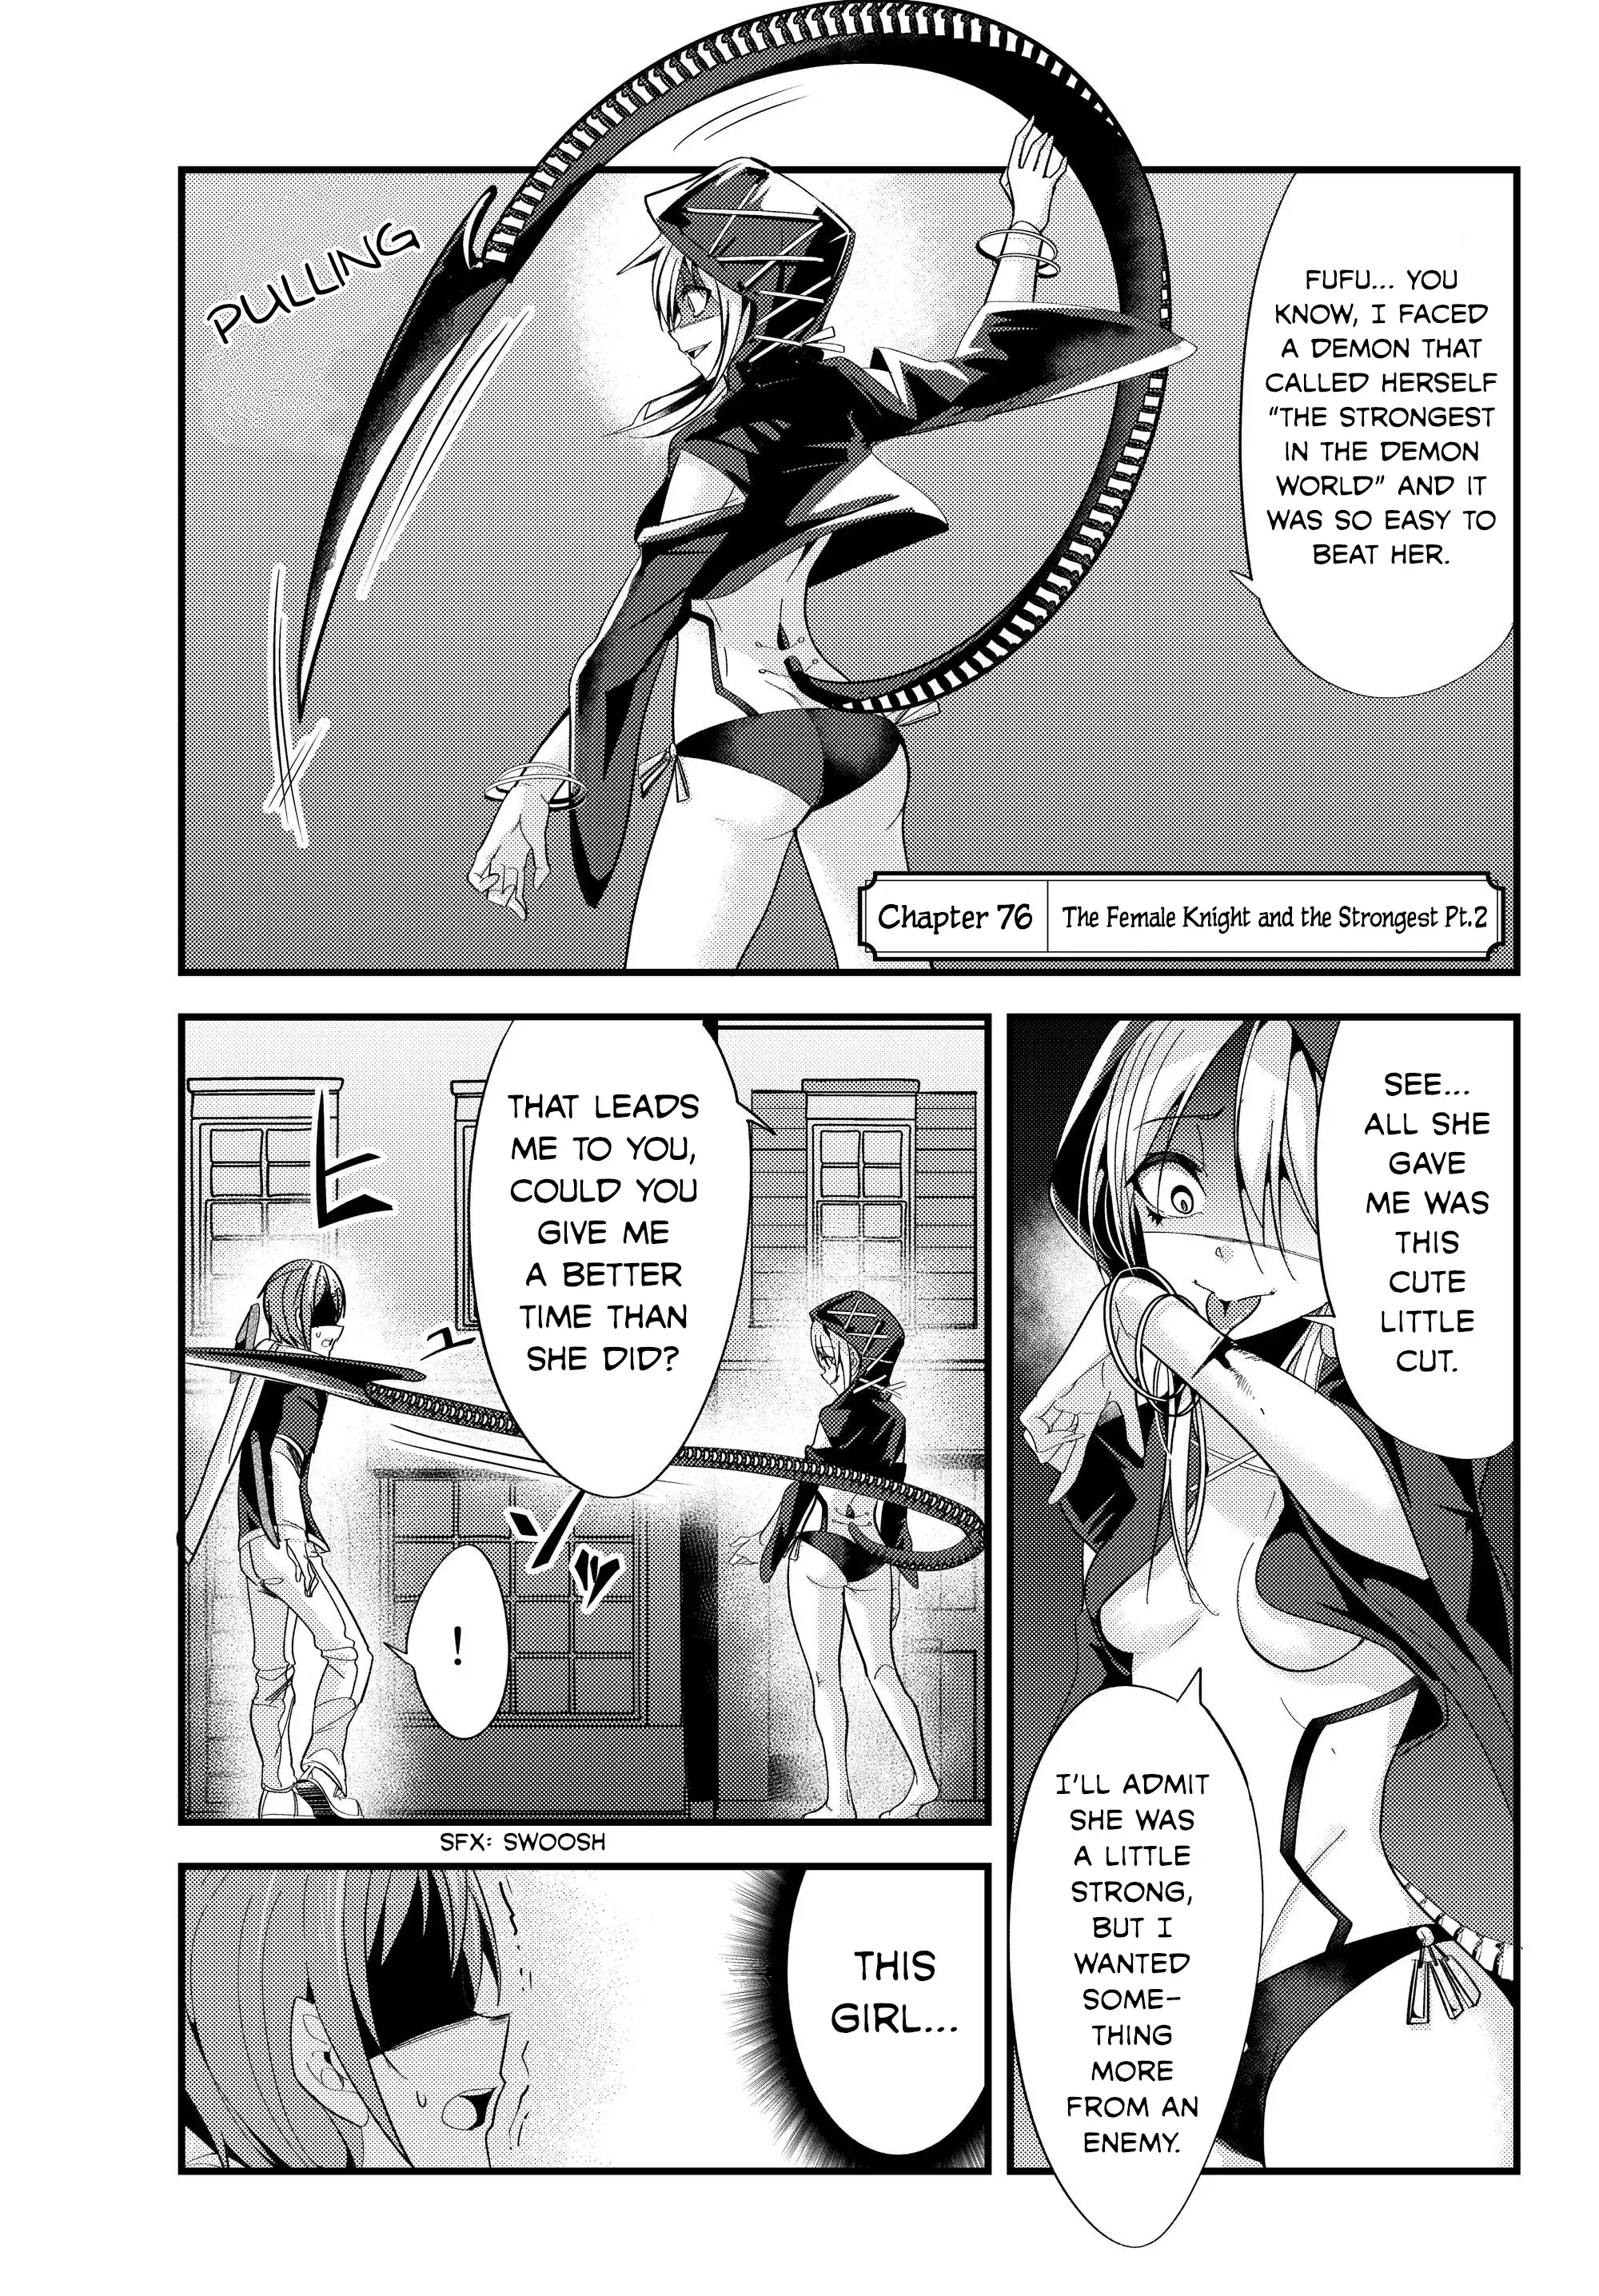 A Story About Treating a Female Knight, Who Has Never Been Treated as a Woman, as a Woman - Chapter 76 Page 1